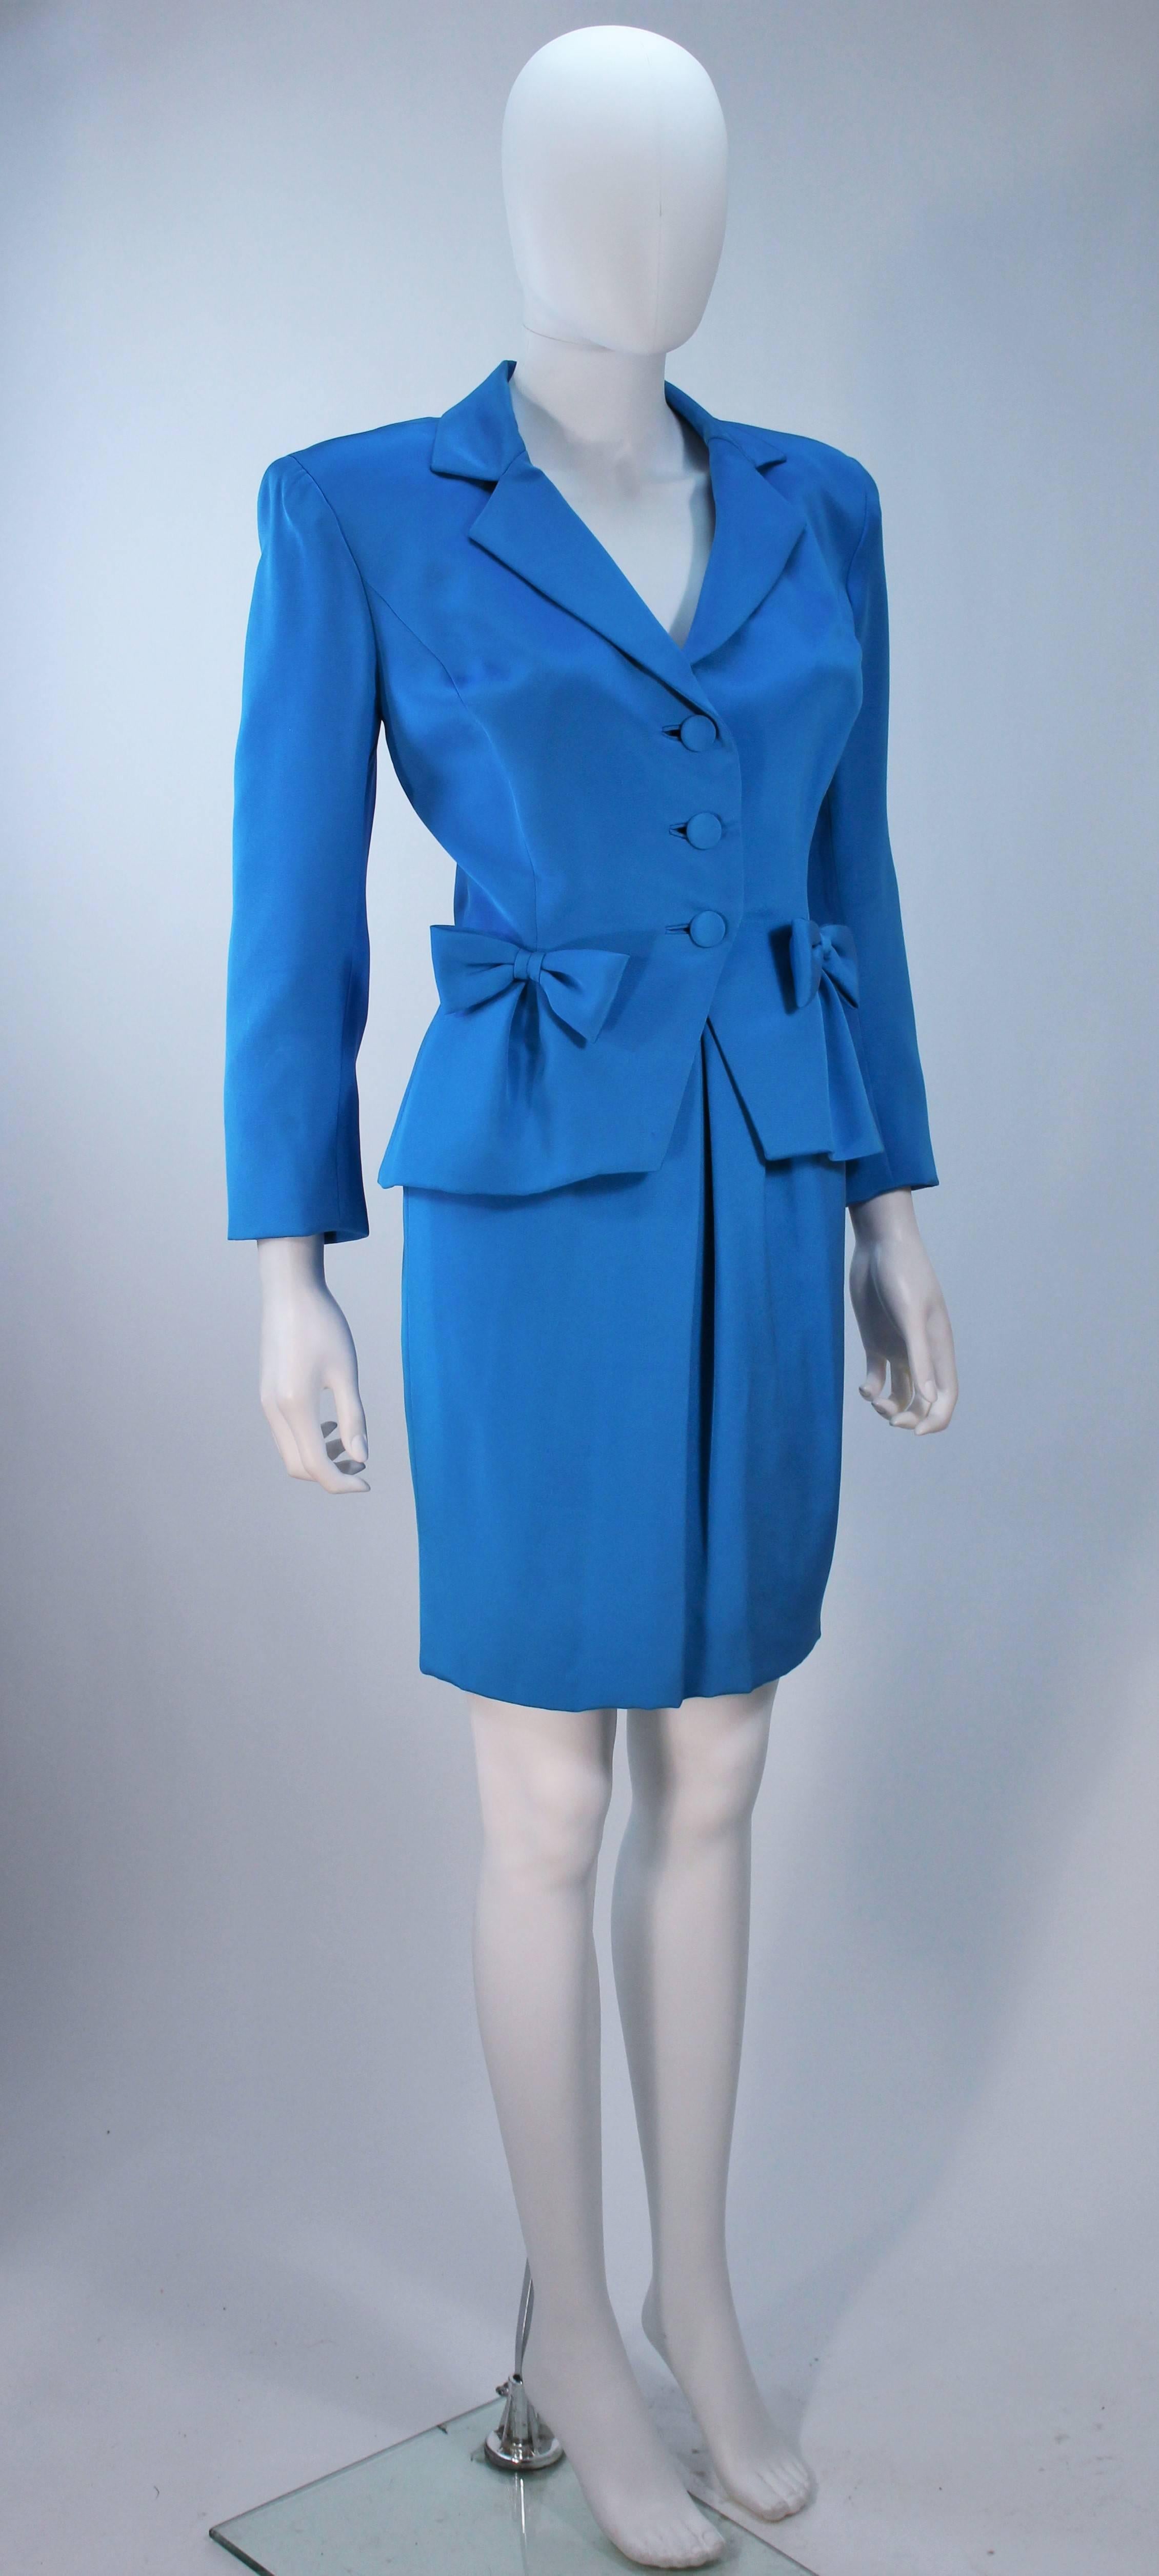 Women's TRAVILLA Blue Silk Skirt Suit with Bows Size 6 For Sale